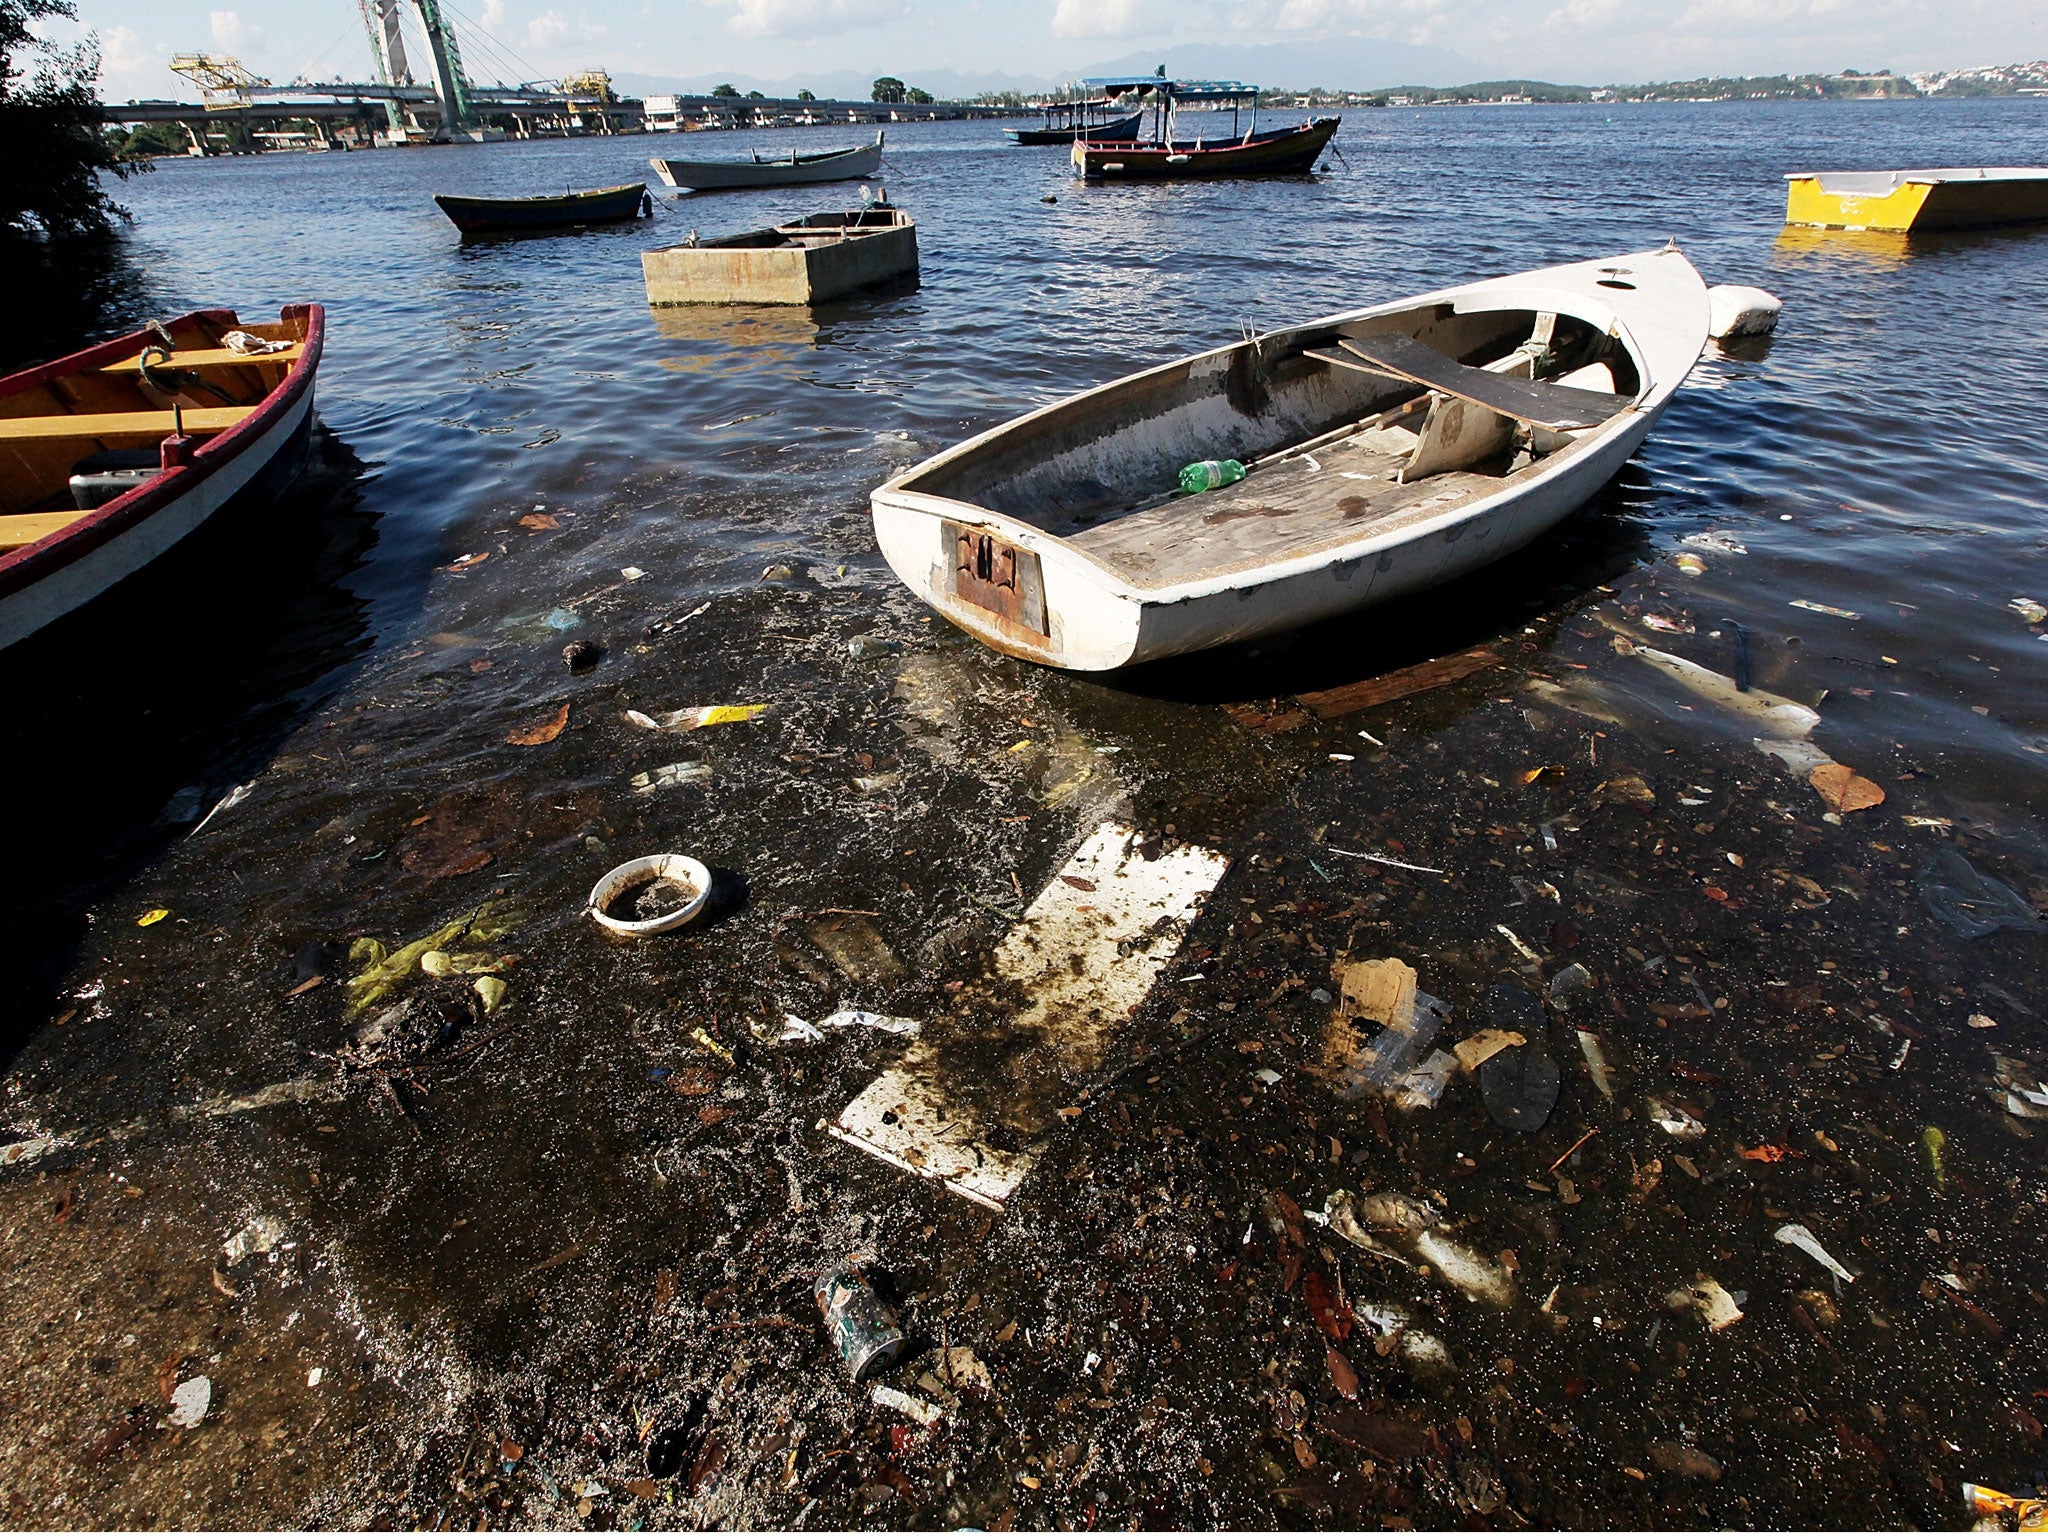 Boats float along the shoreline of the polluted waters of Guanabara Bay